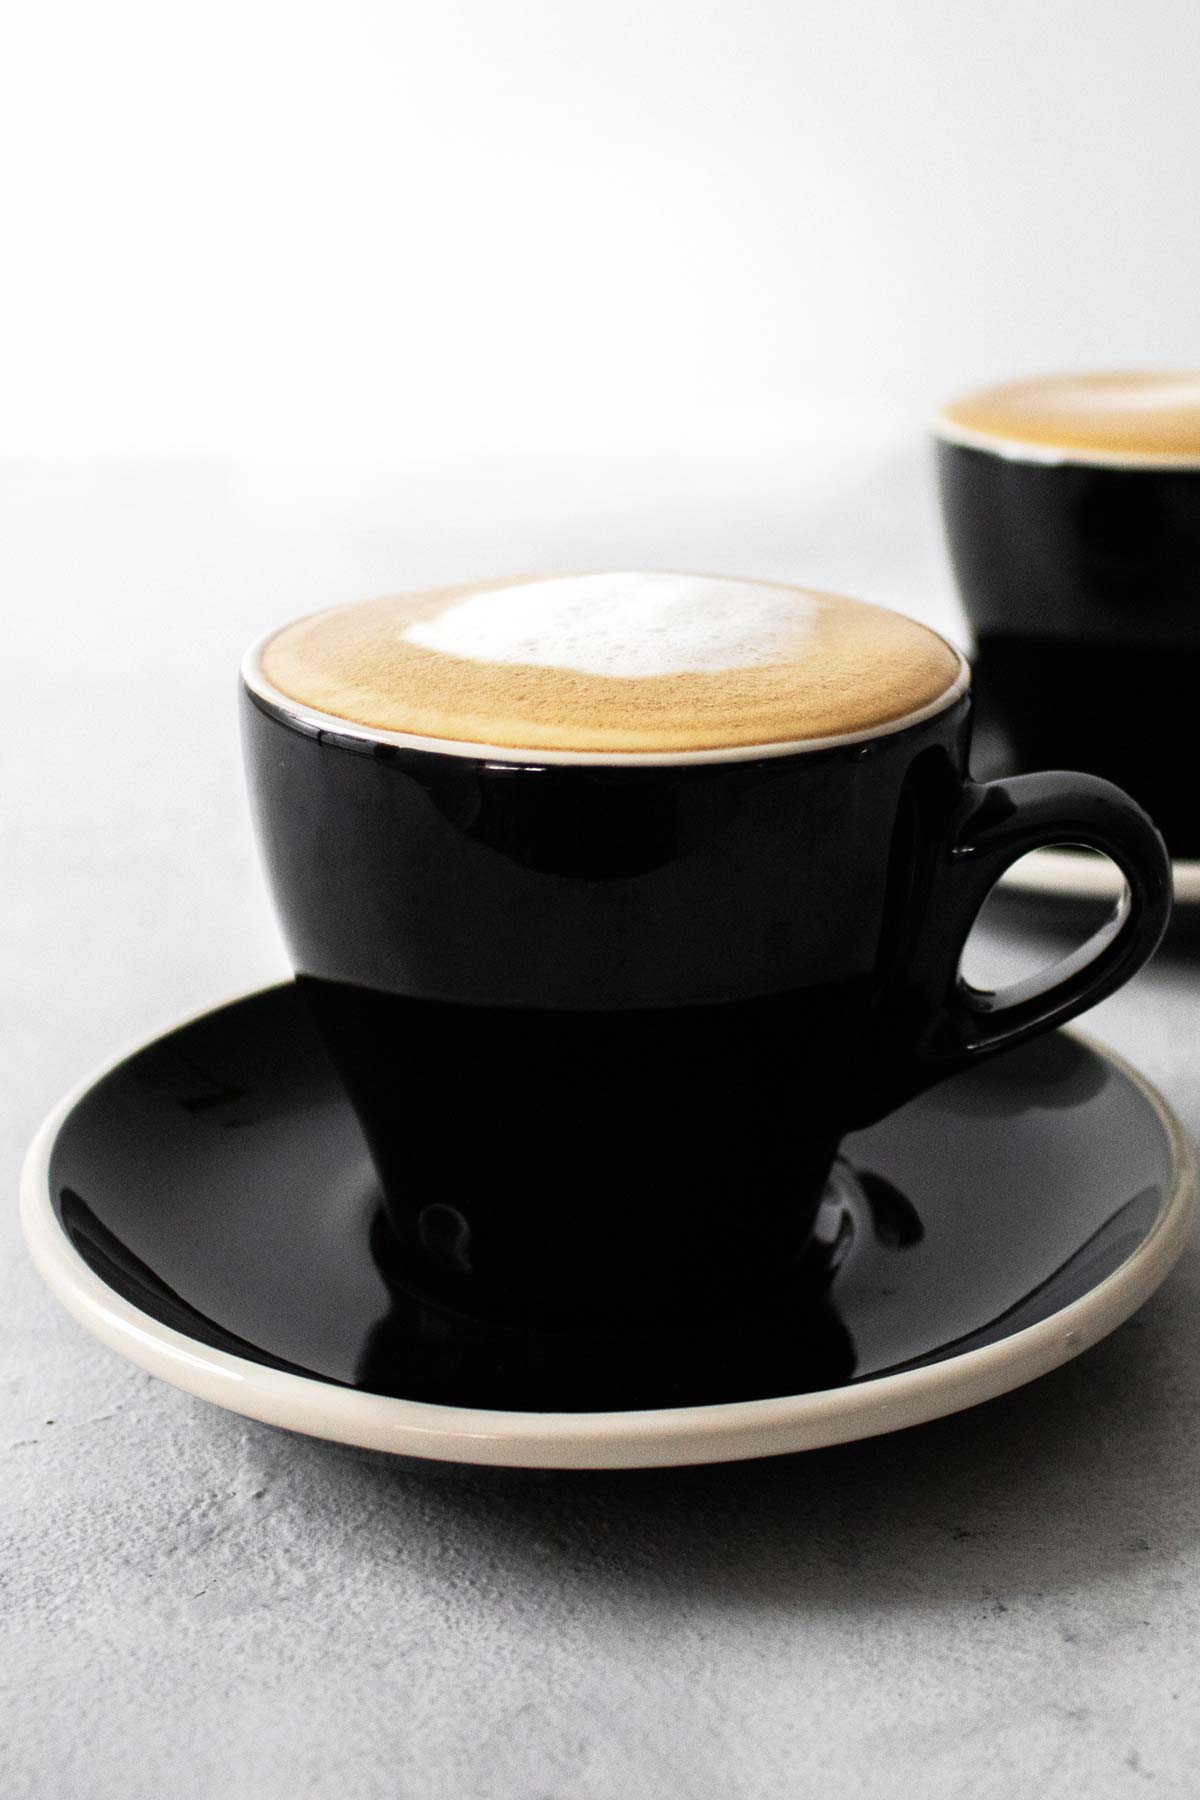 Two black cups with saucer filled with cappuccino.